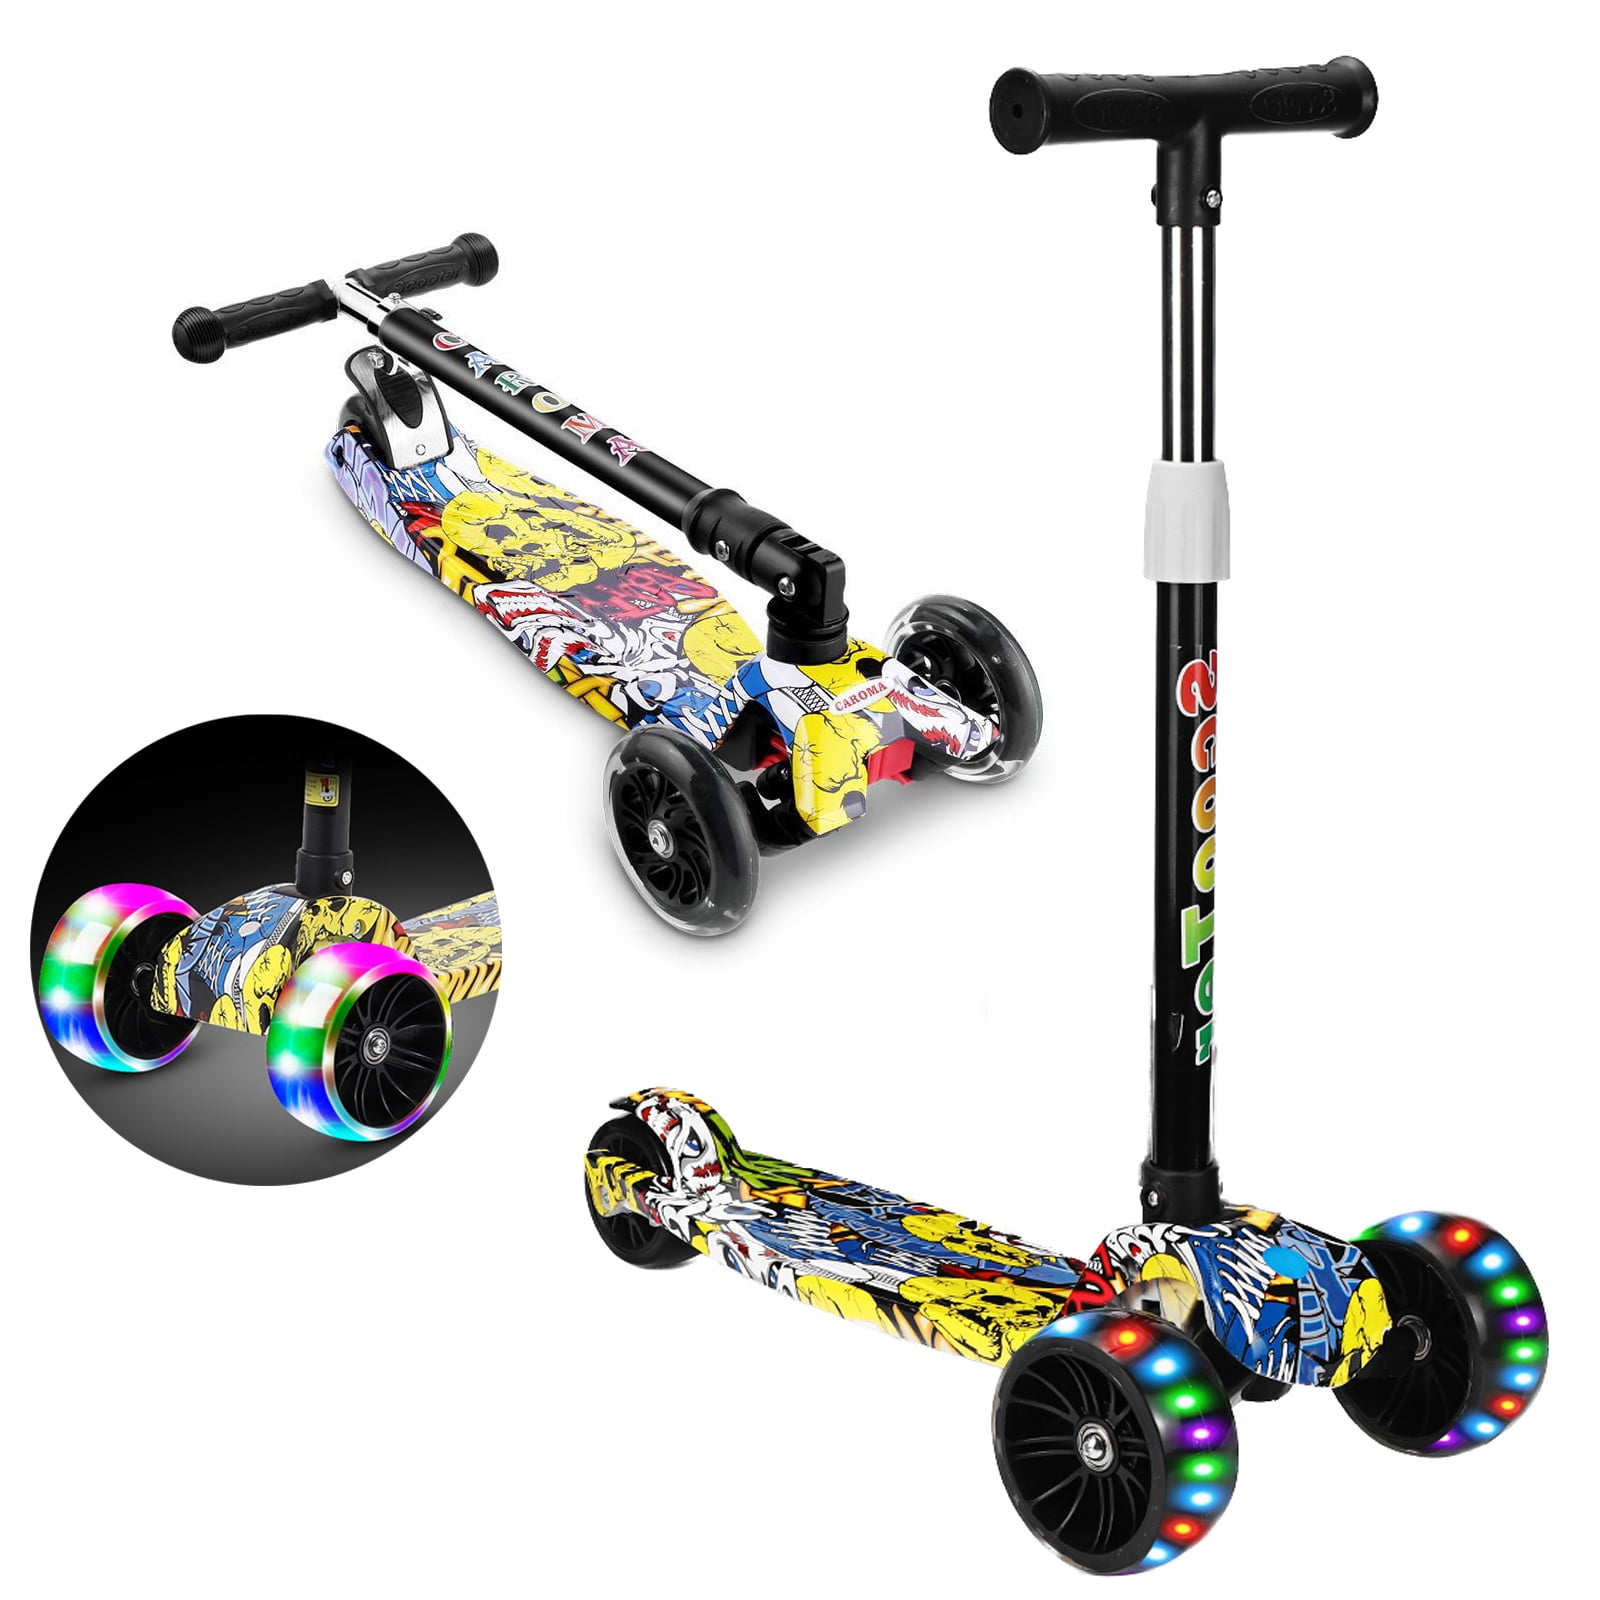 Details about   Kids Adjustable Height Kick Scooter PU Flashing Wheels Wide Deck Folding THP 